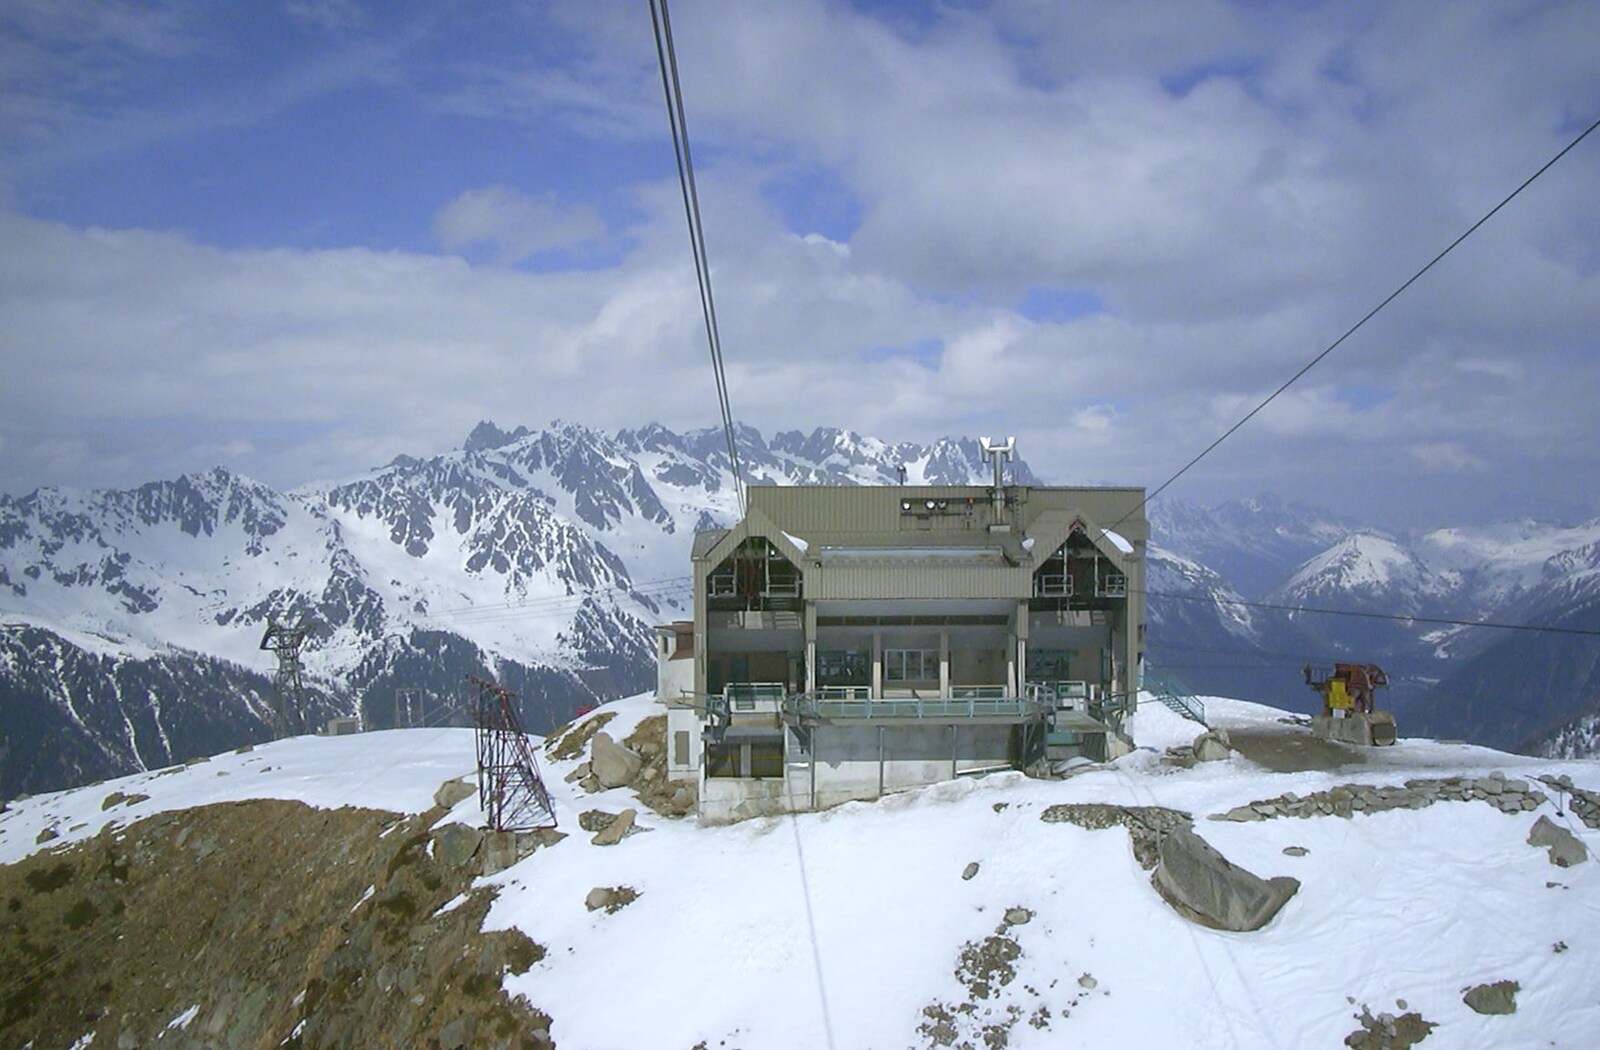 The cable car head from 3G Lab Goes Skiing In Chamonix, France - 12th March 2002